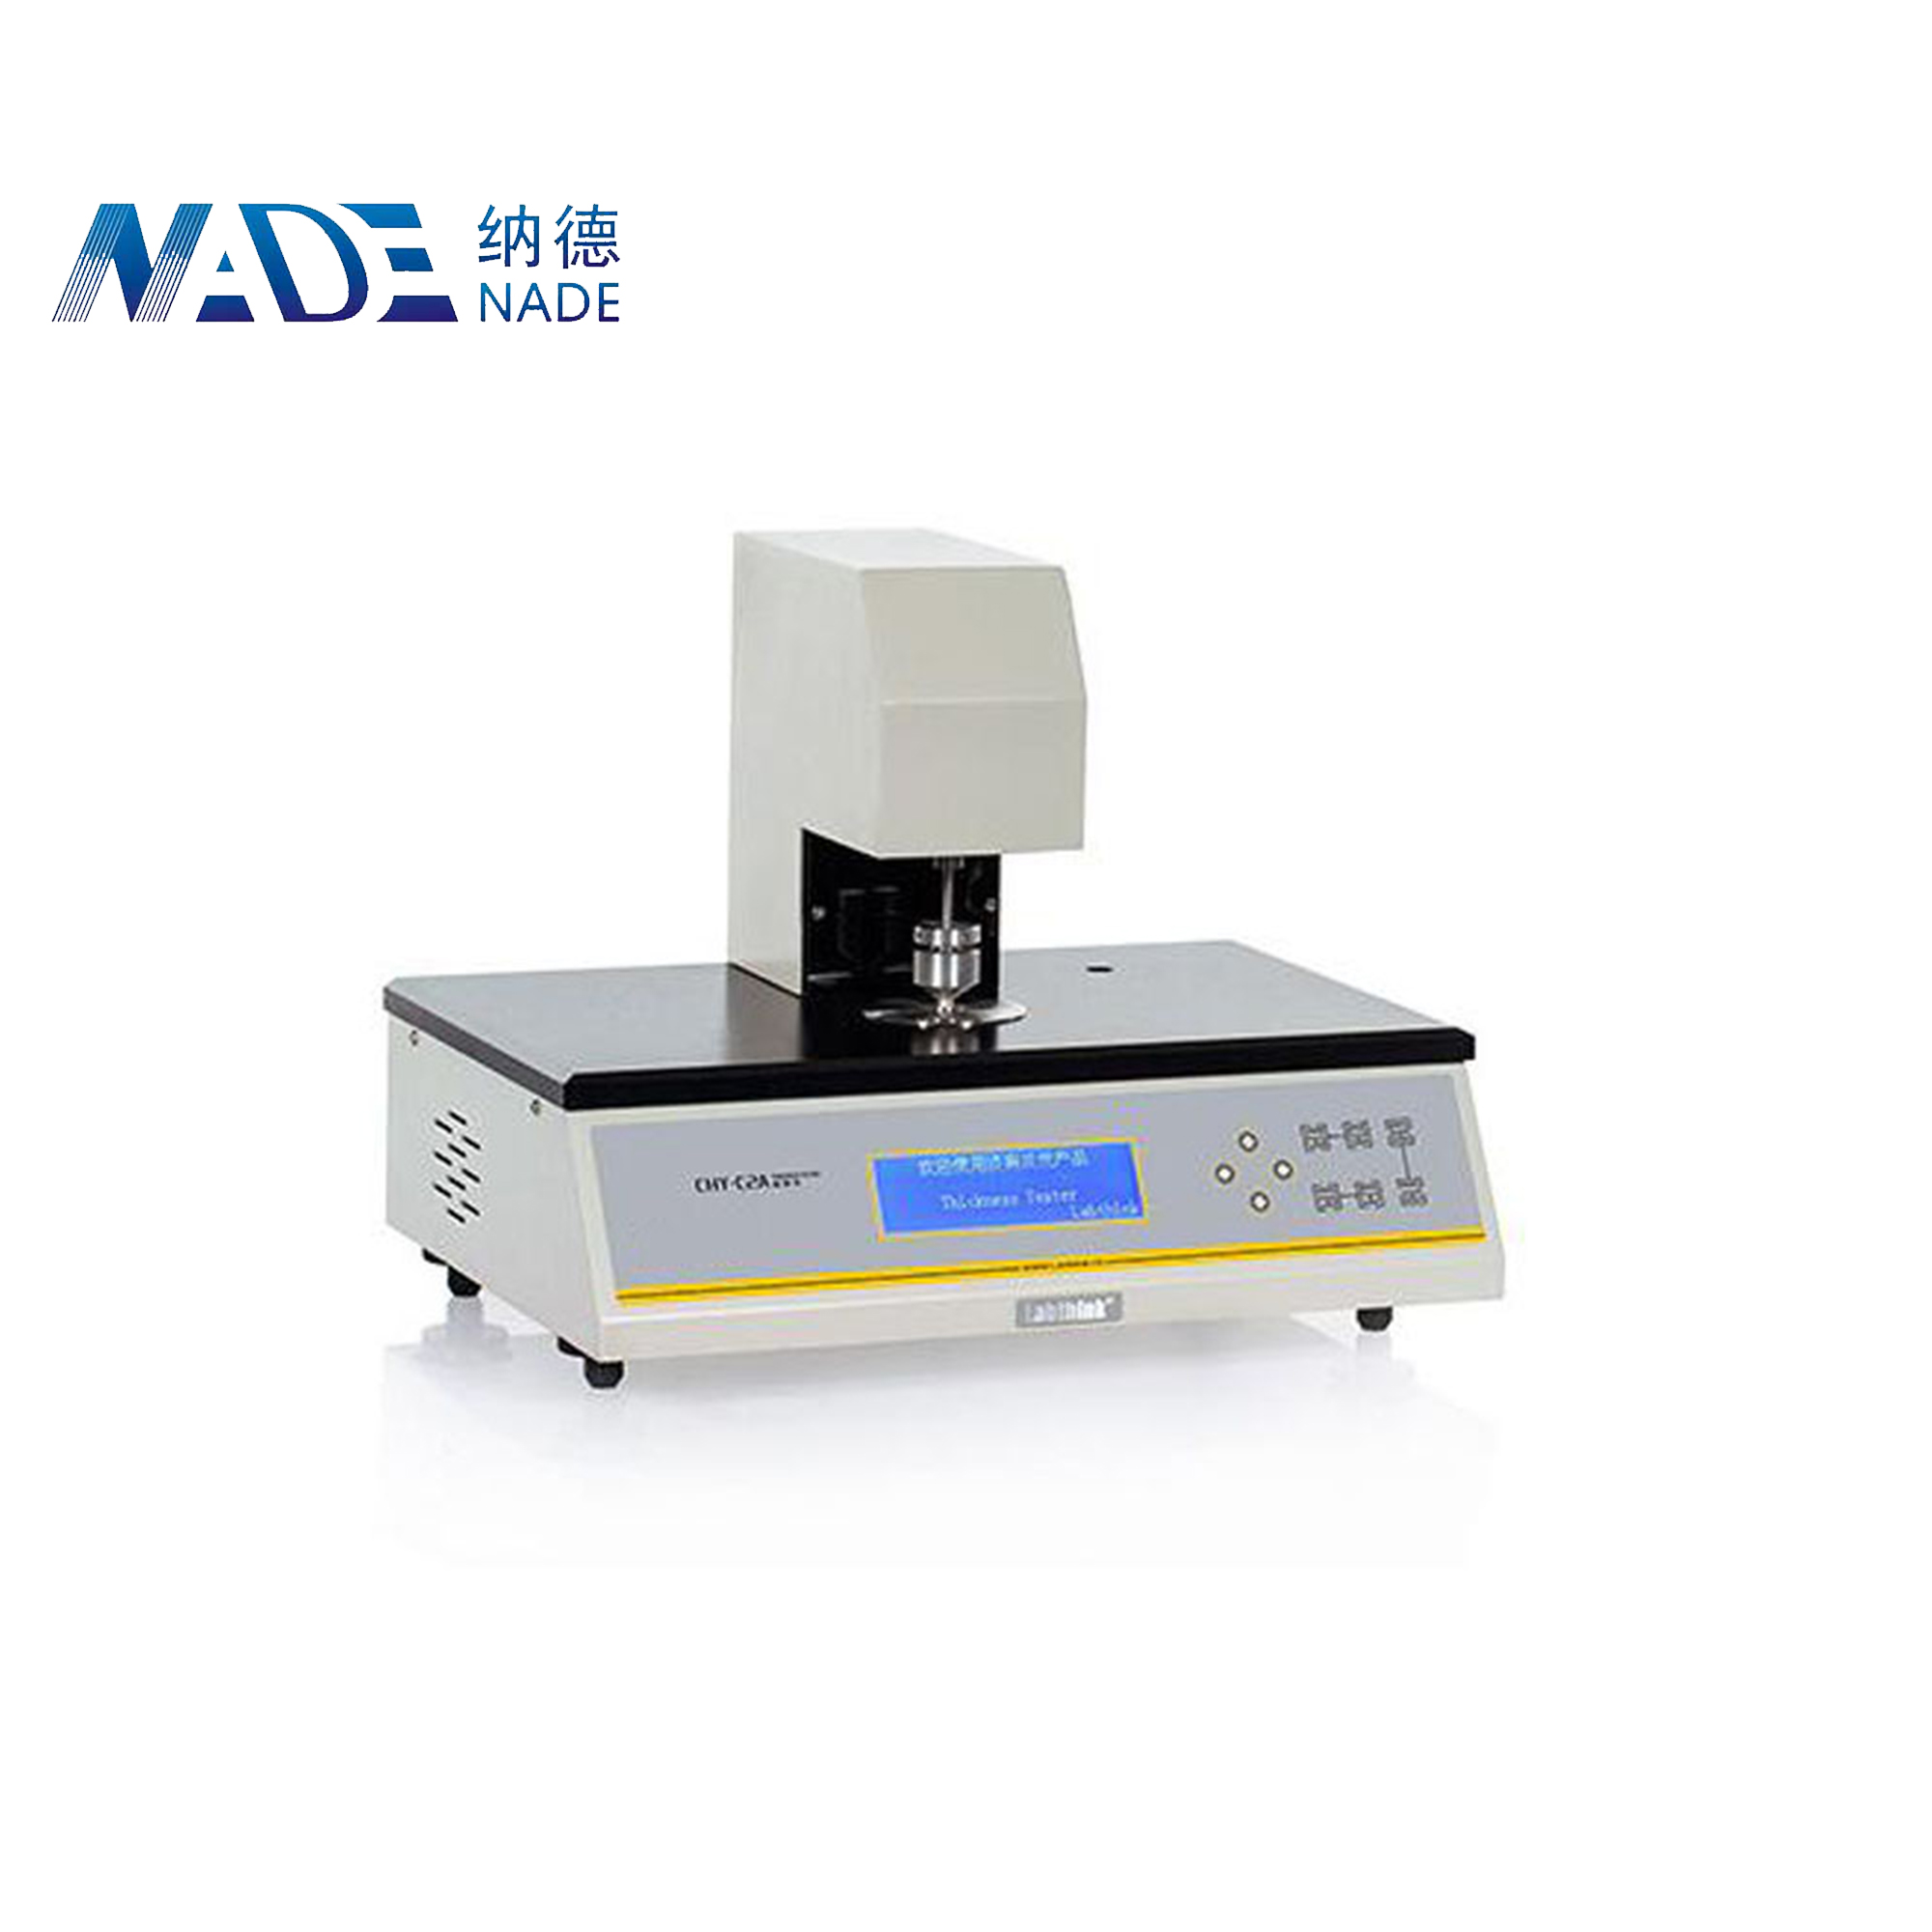 Nade Plastic Film Tablet Thickness Tester CHY-C2A Thickness Measuring Testing Instrument